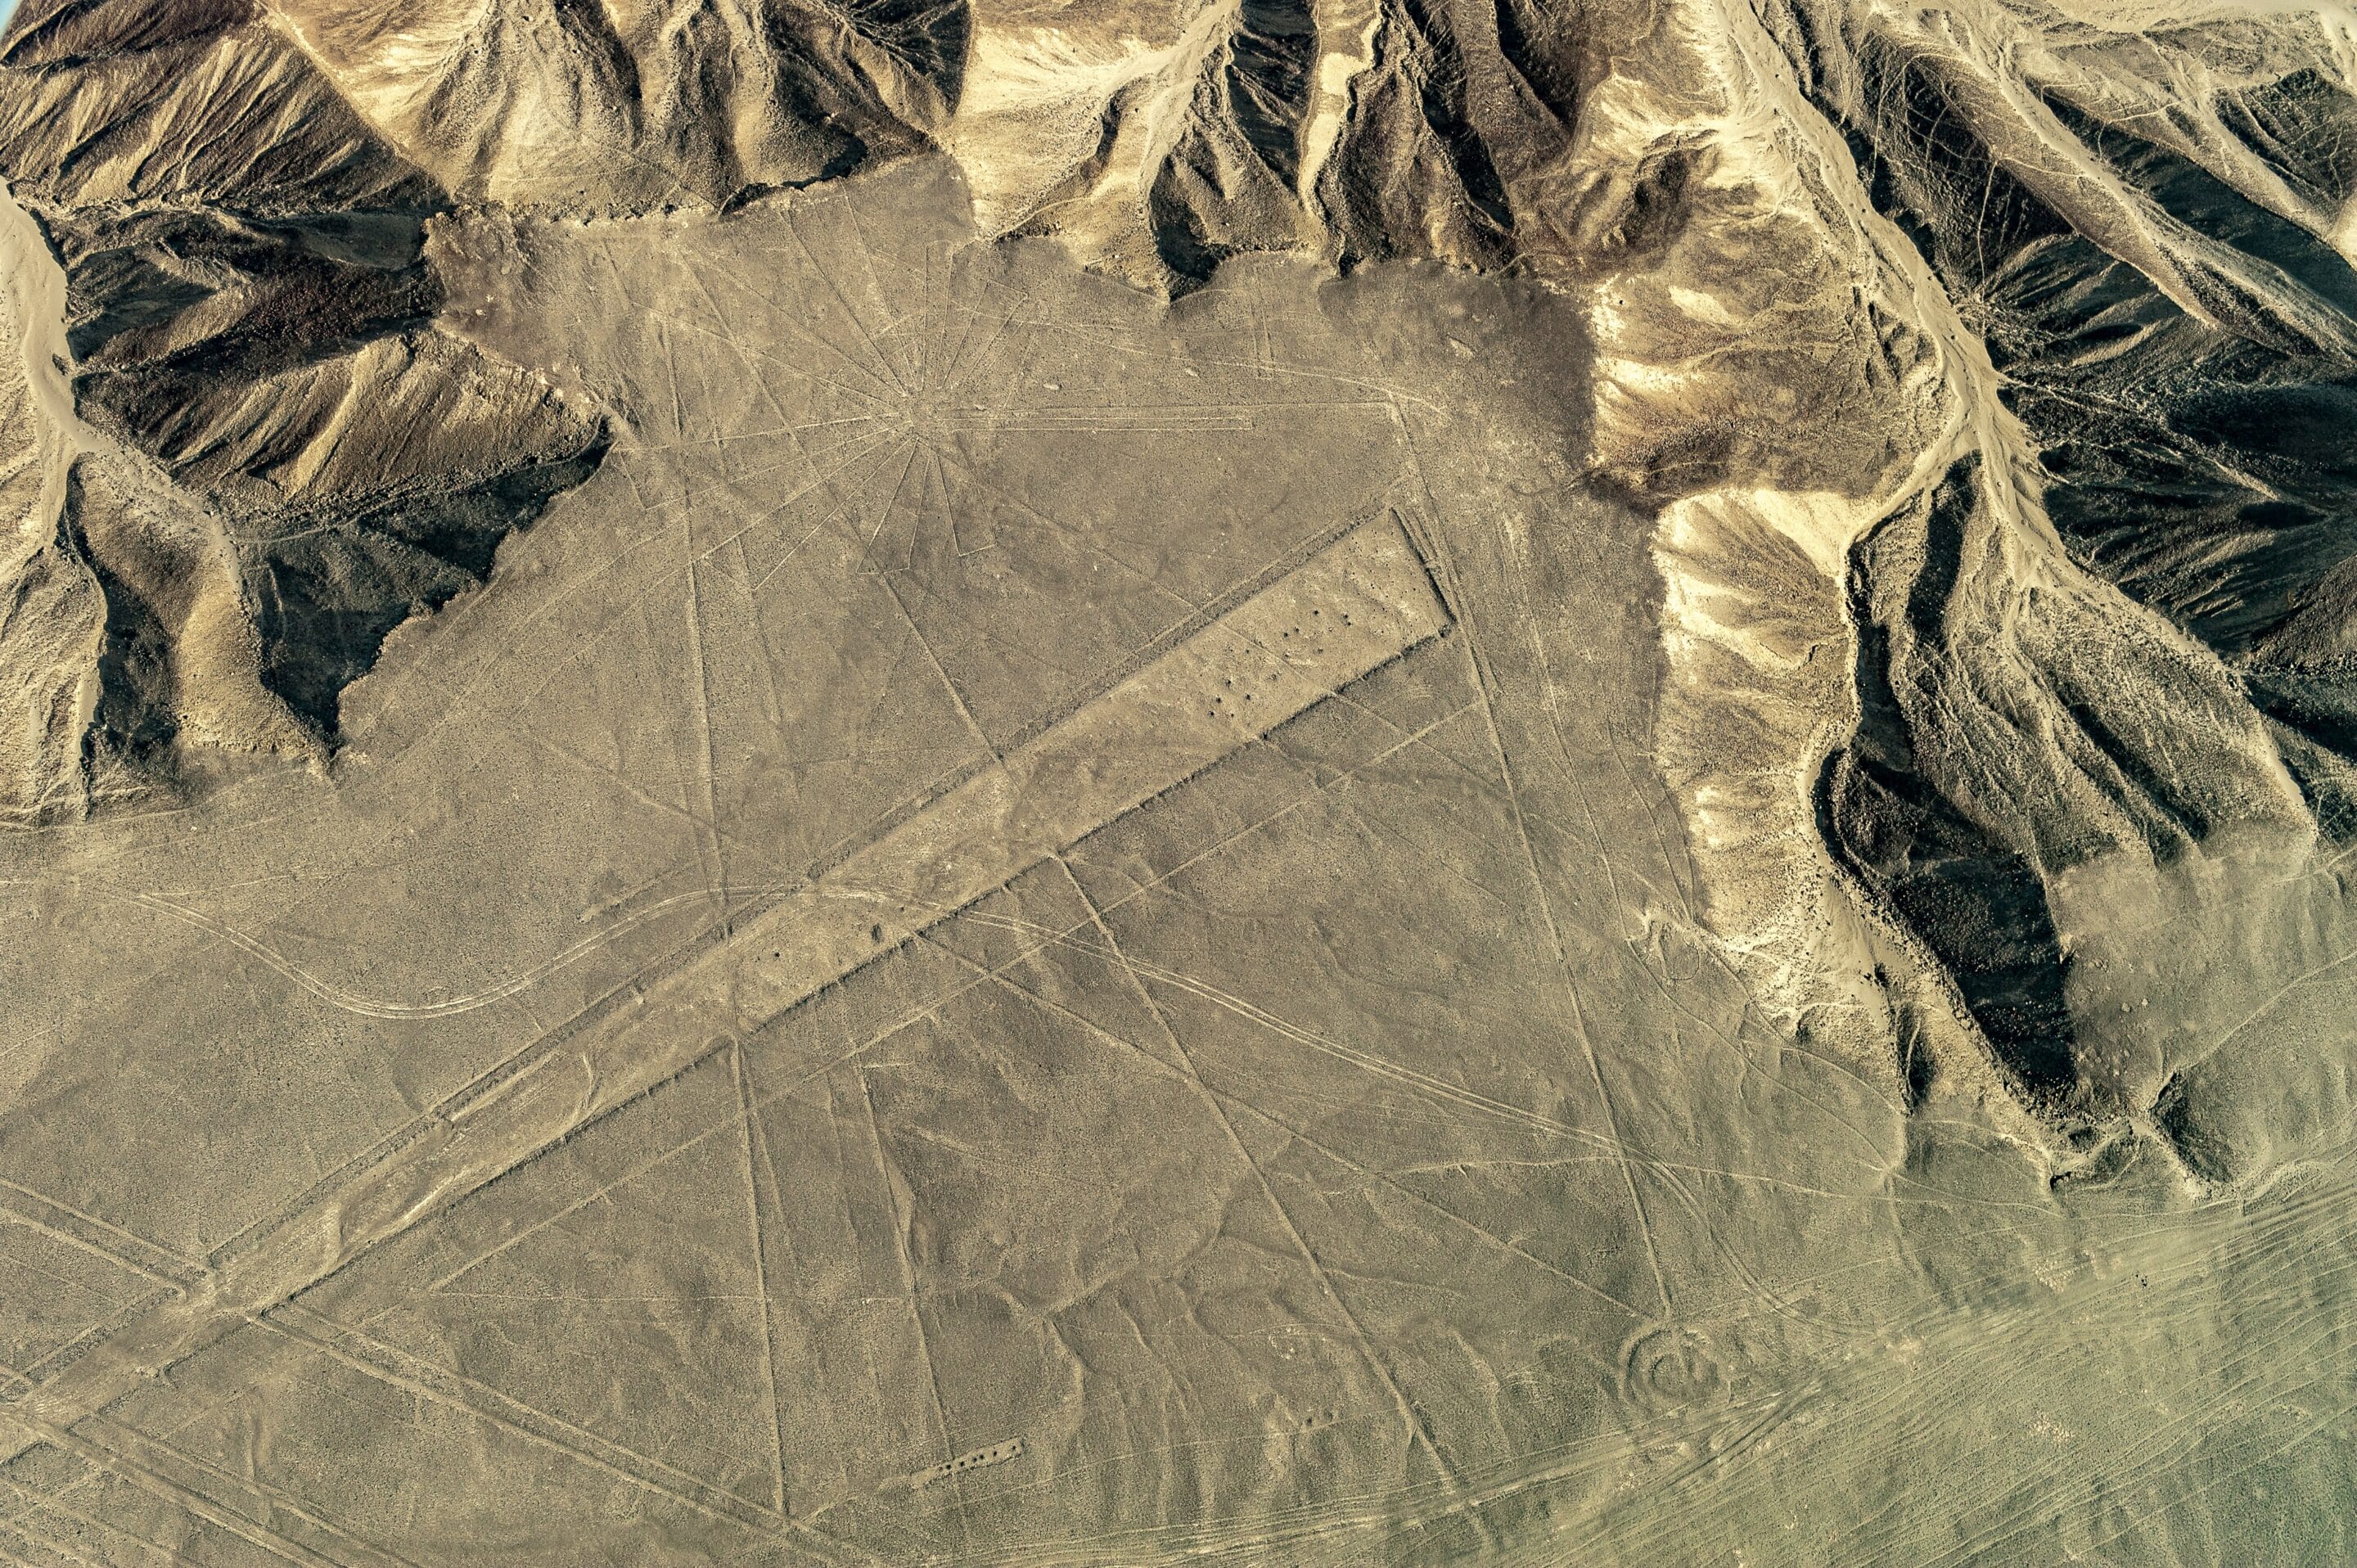 How to see the Nazca Lines in Peru